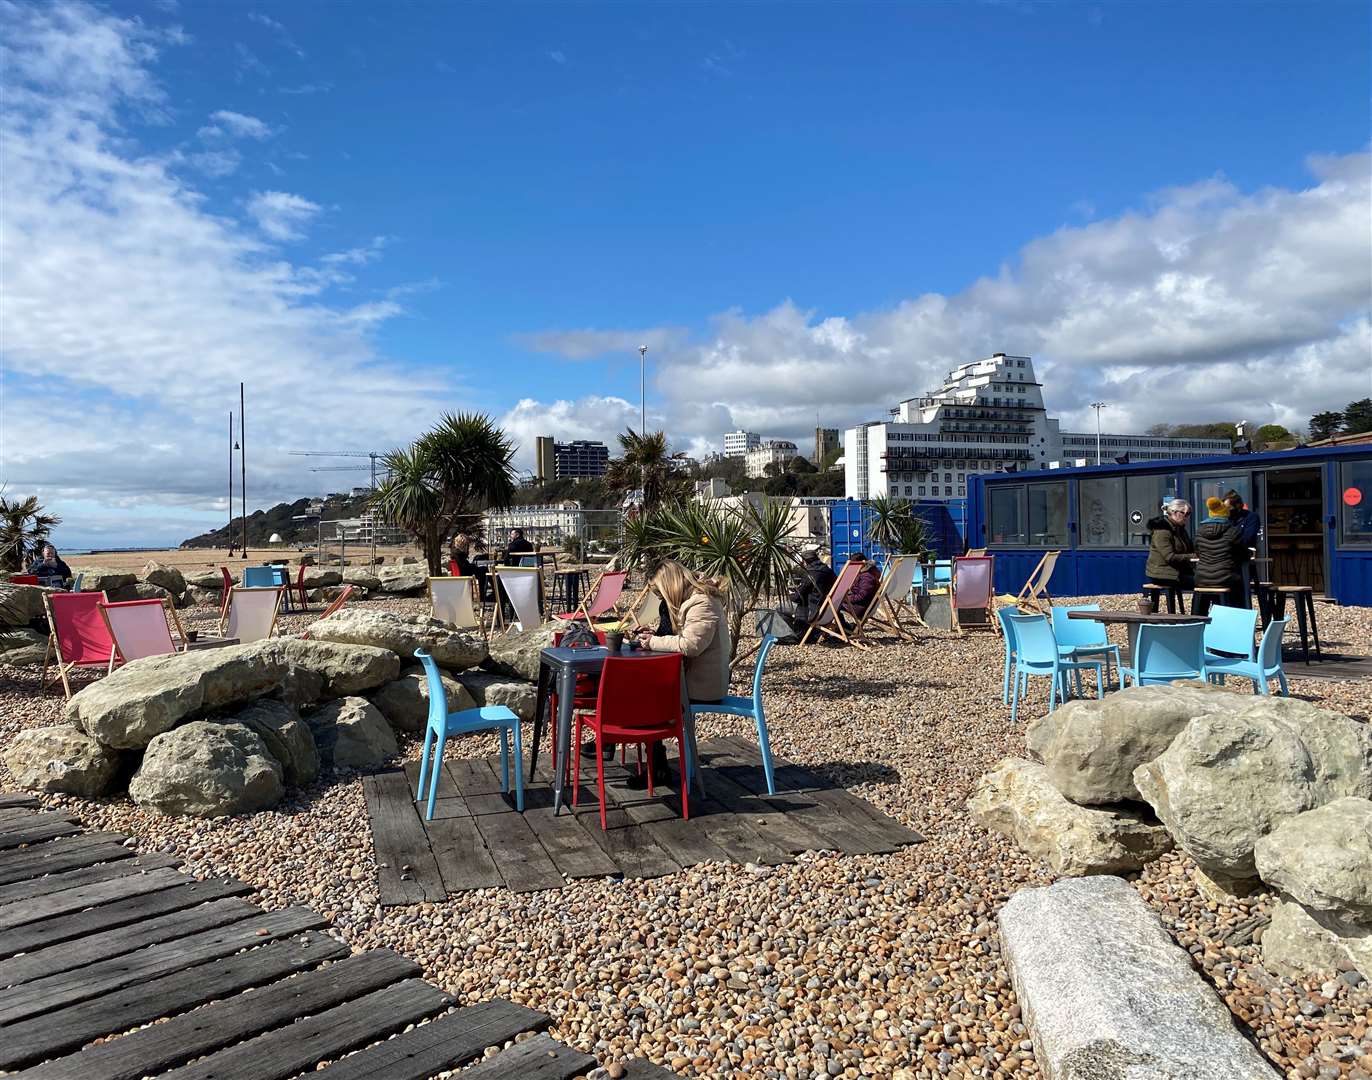 The Pilot Bar is a popular spot for residents and visitors in the summer months